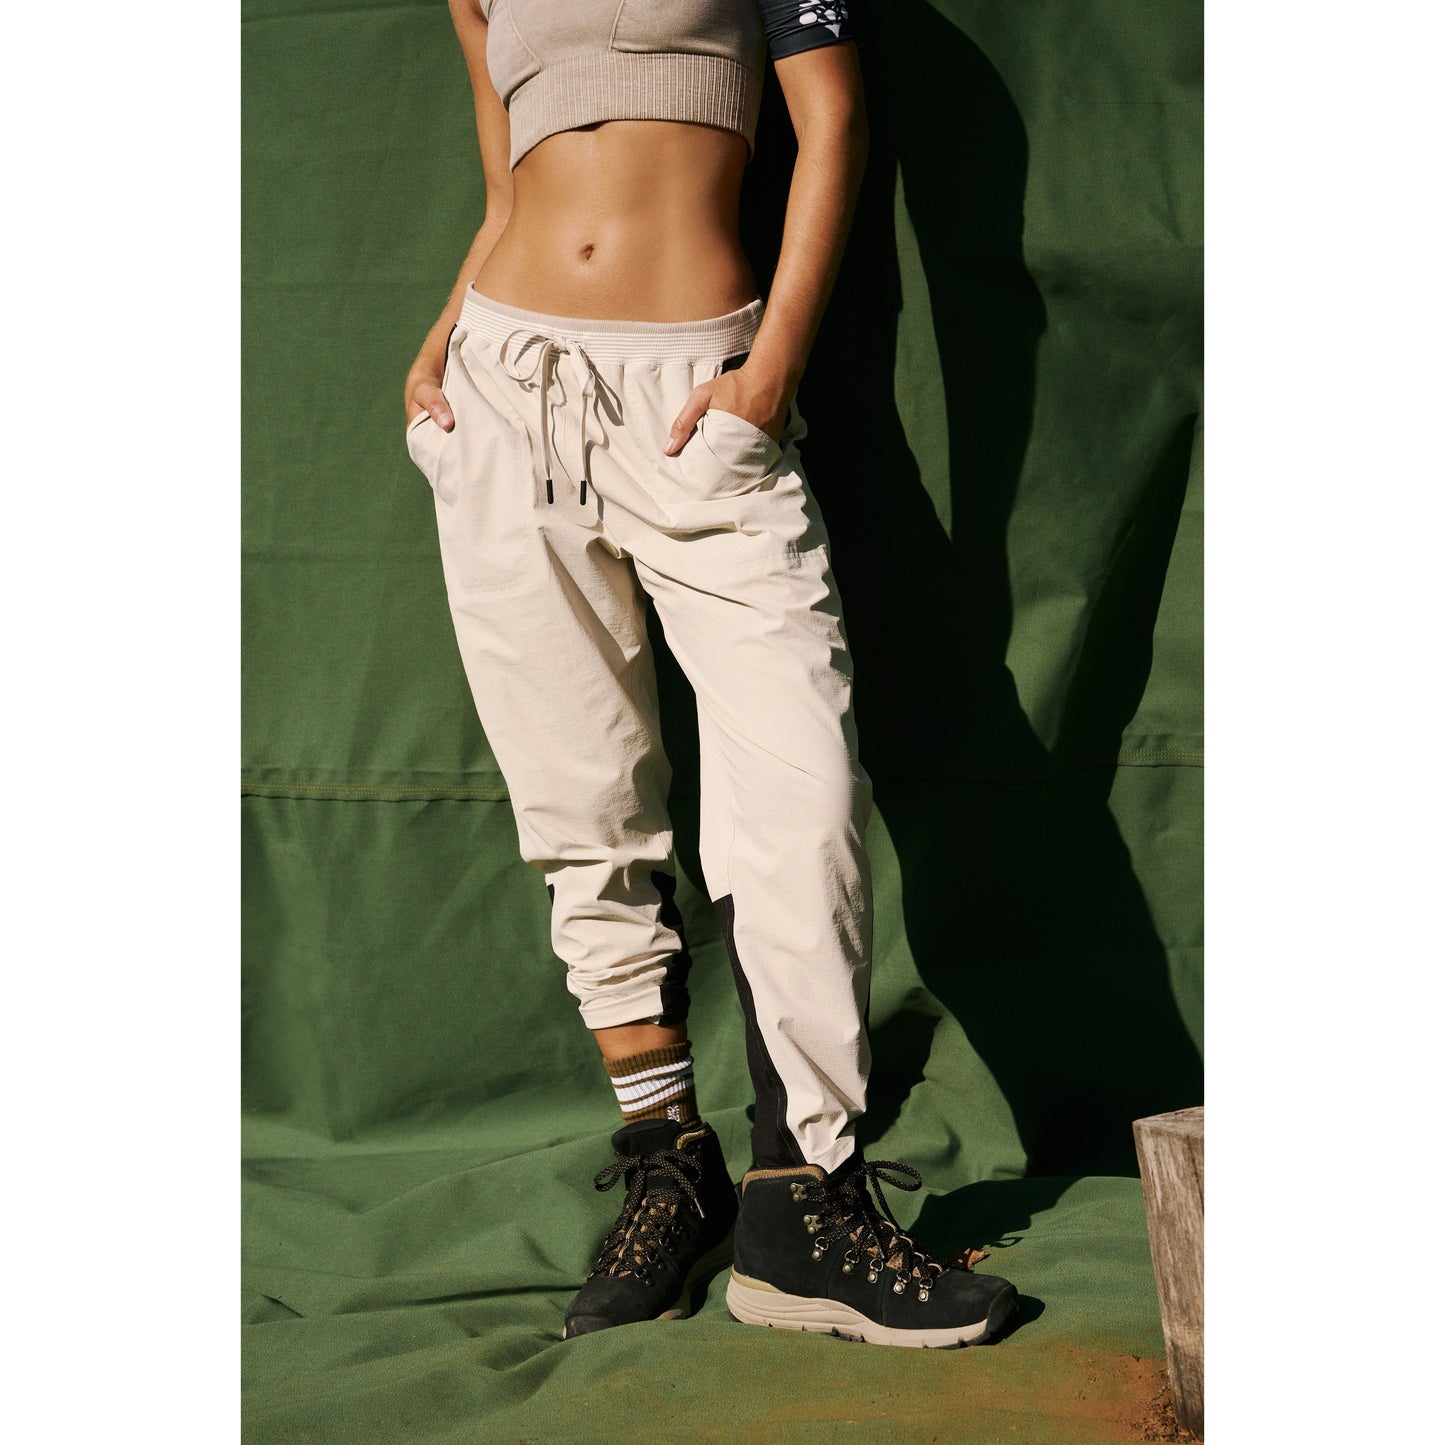 A person wearing a light grey crop top and high-waisted Muted Beige Cascade Joggers stands with hands in pockets against a green backdrop, only the torso and legs are visible. (Brand: Free People Movement)